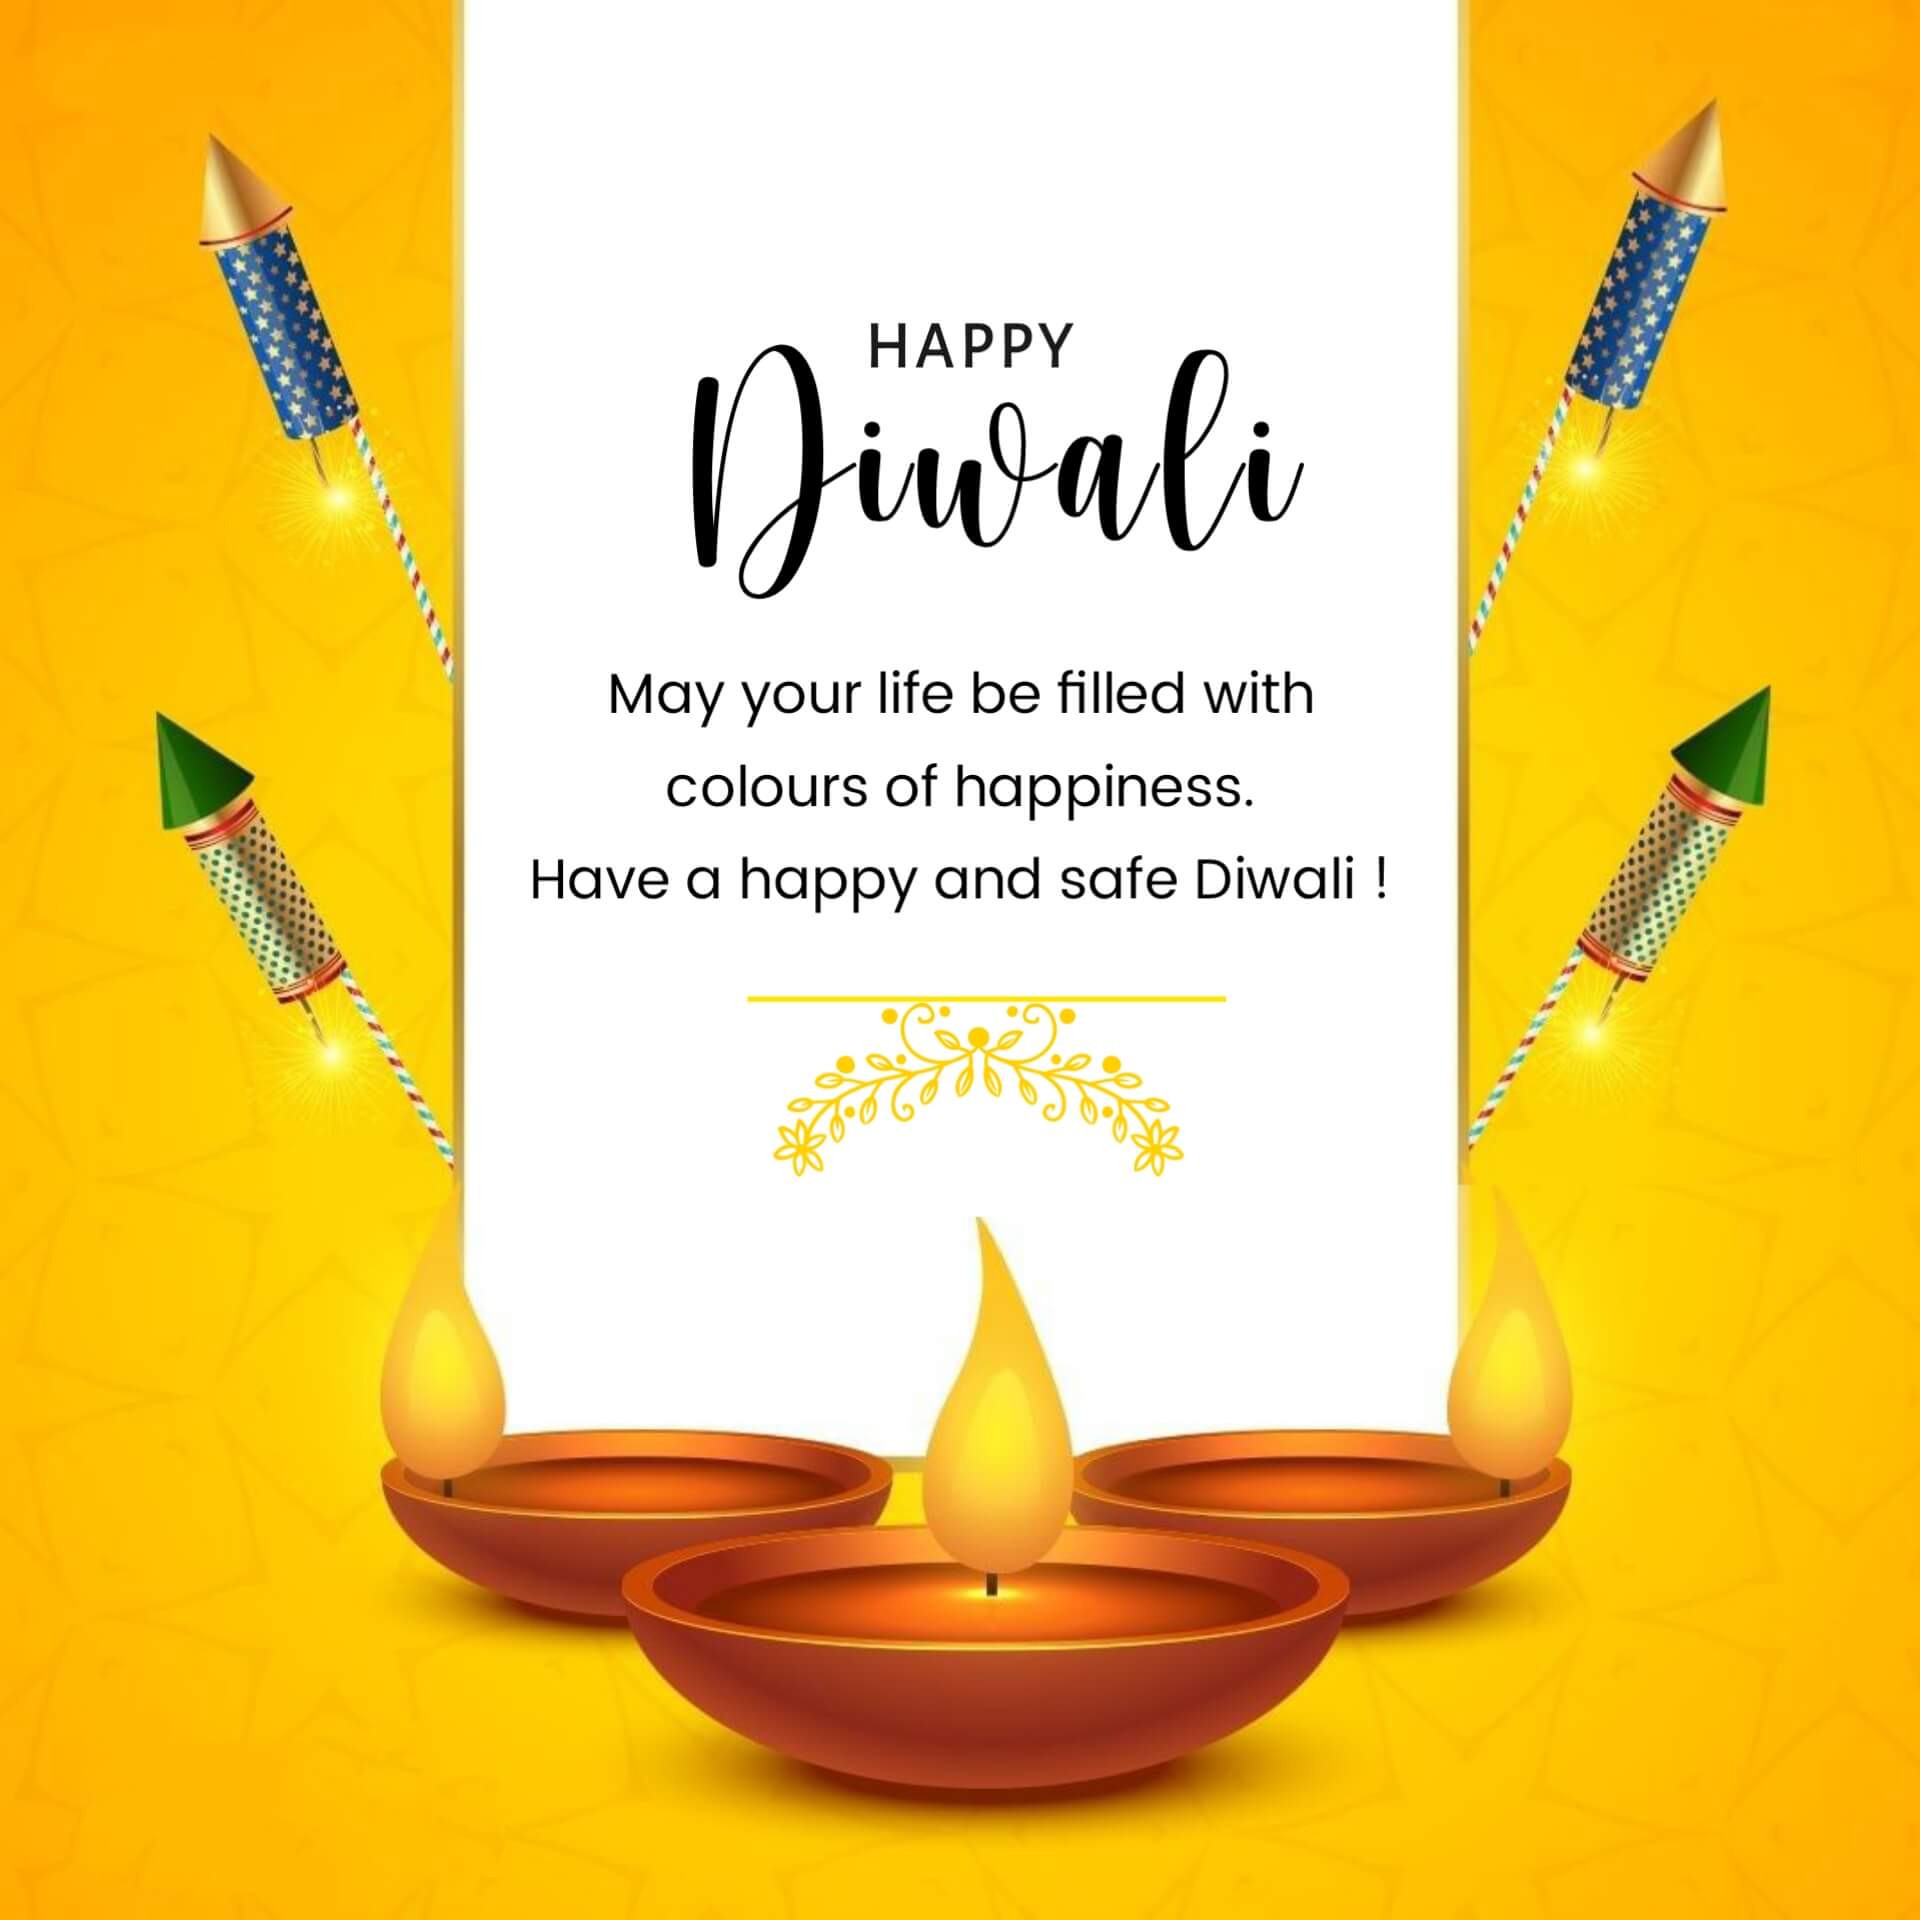 Happy Diwali Wishes, Messages, Quotes & Greetings for 2022